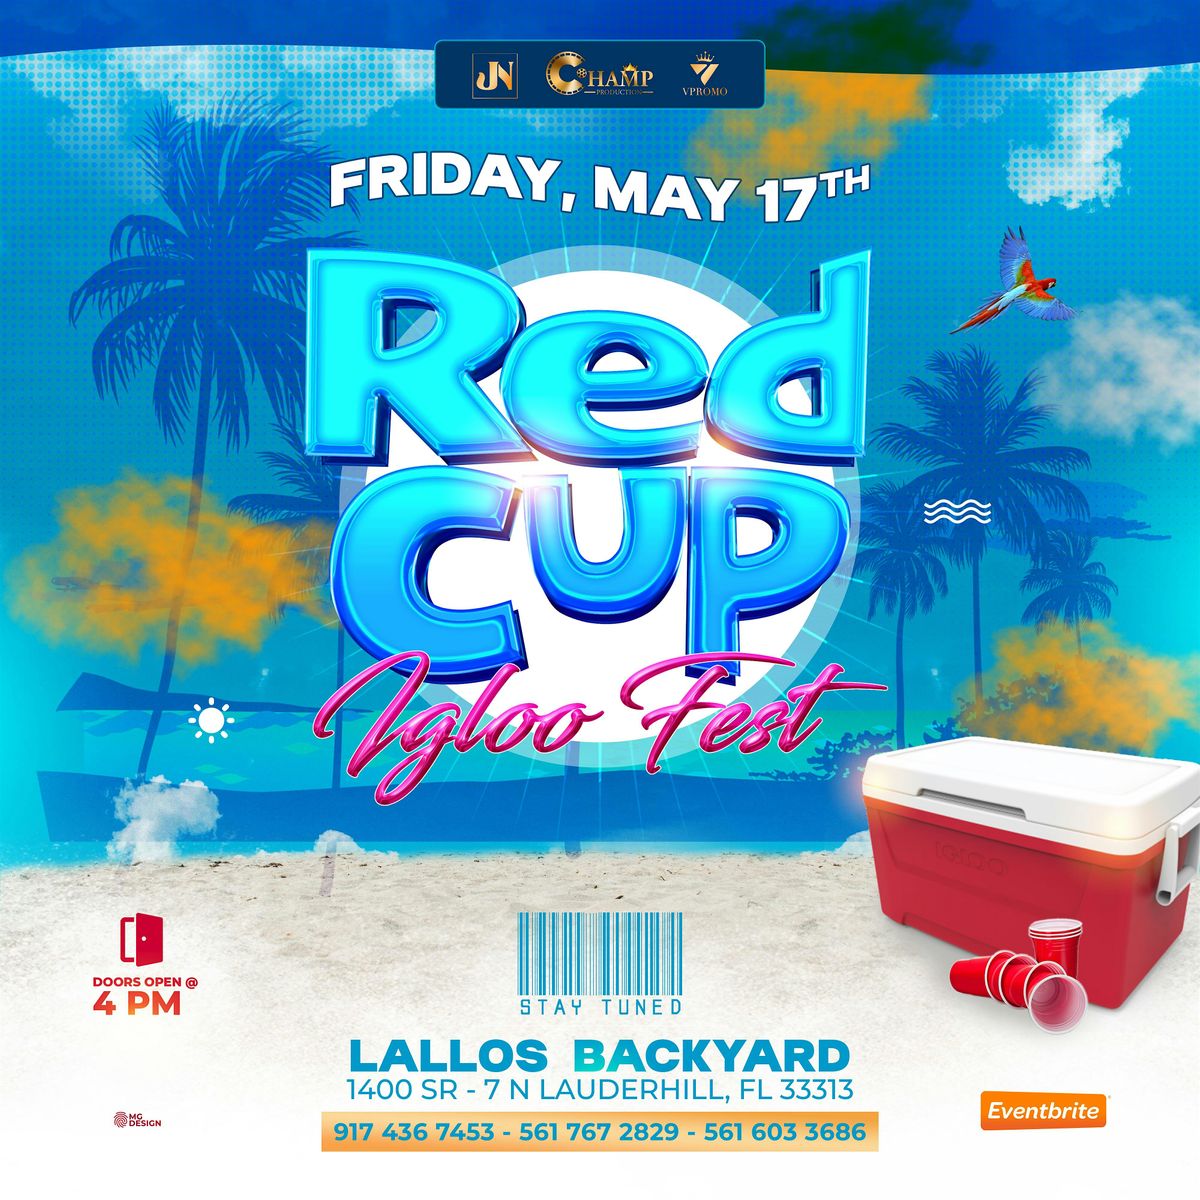 RED CUP IGLOO FEST